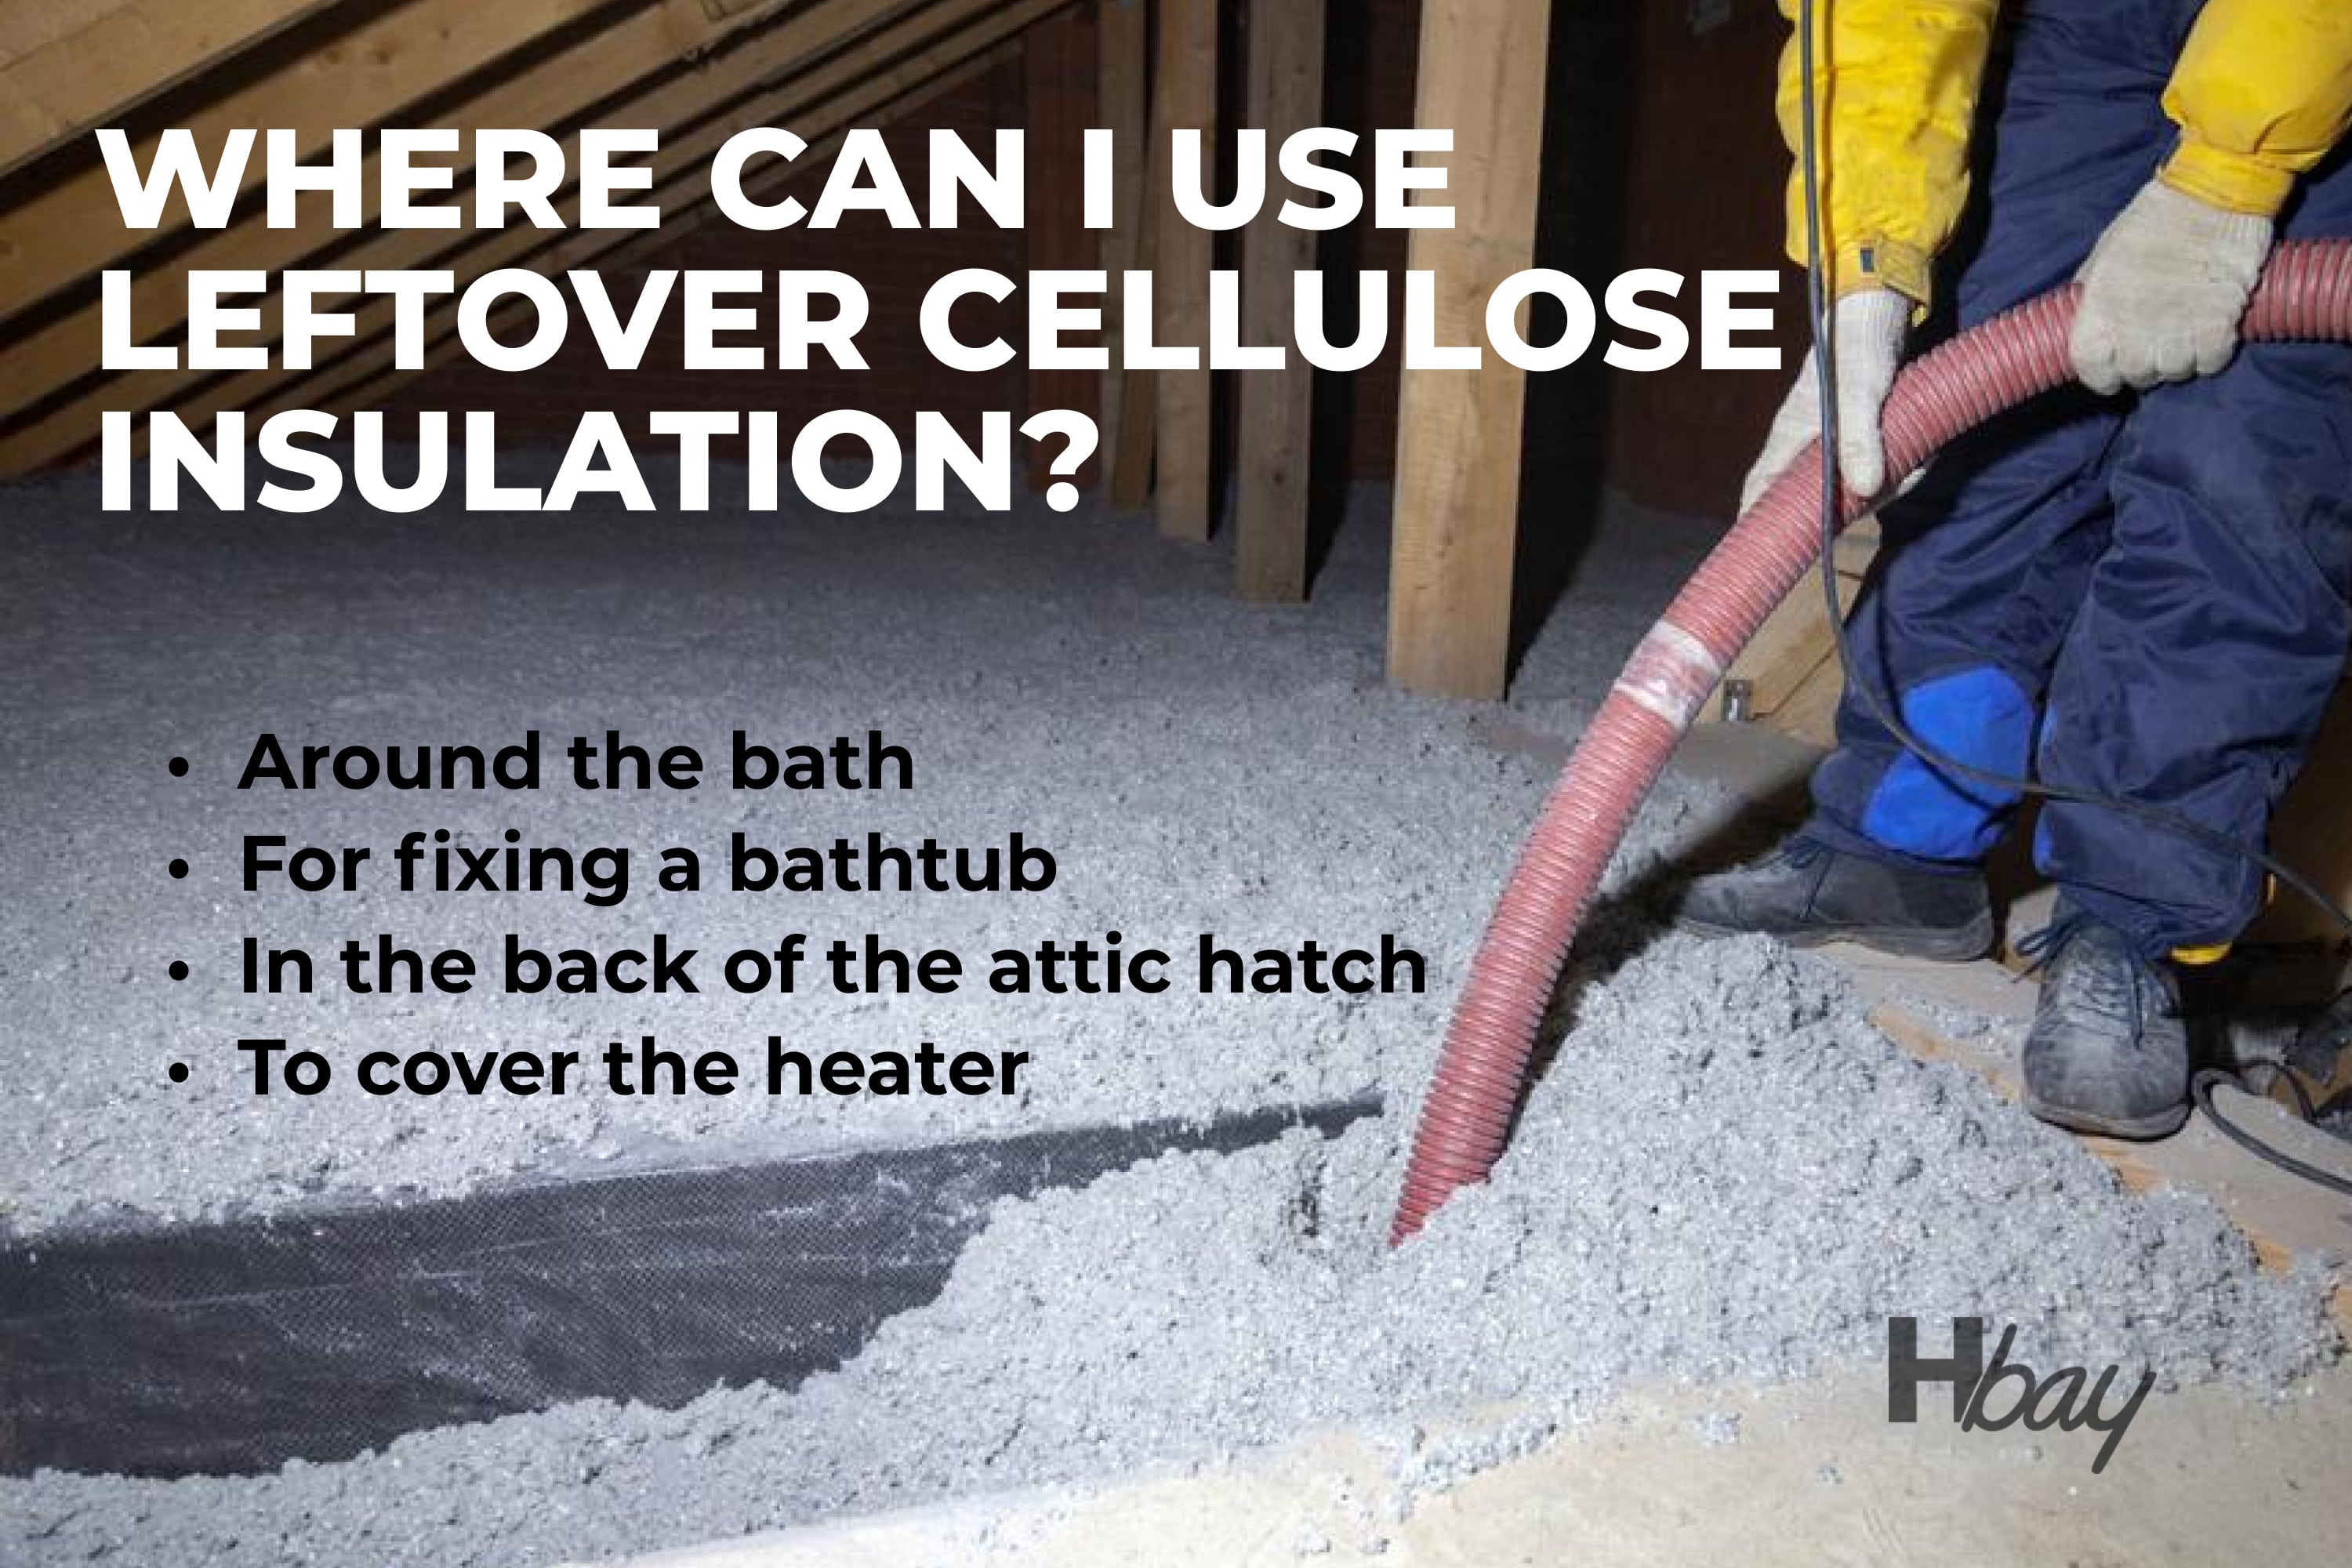 Where can I use leftover cellulose insulation